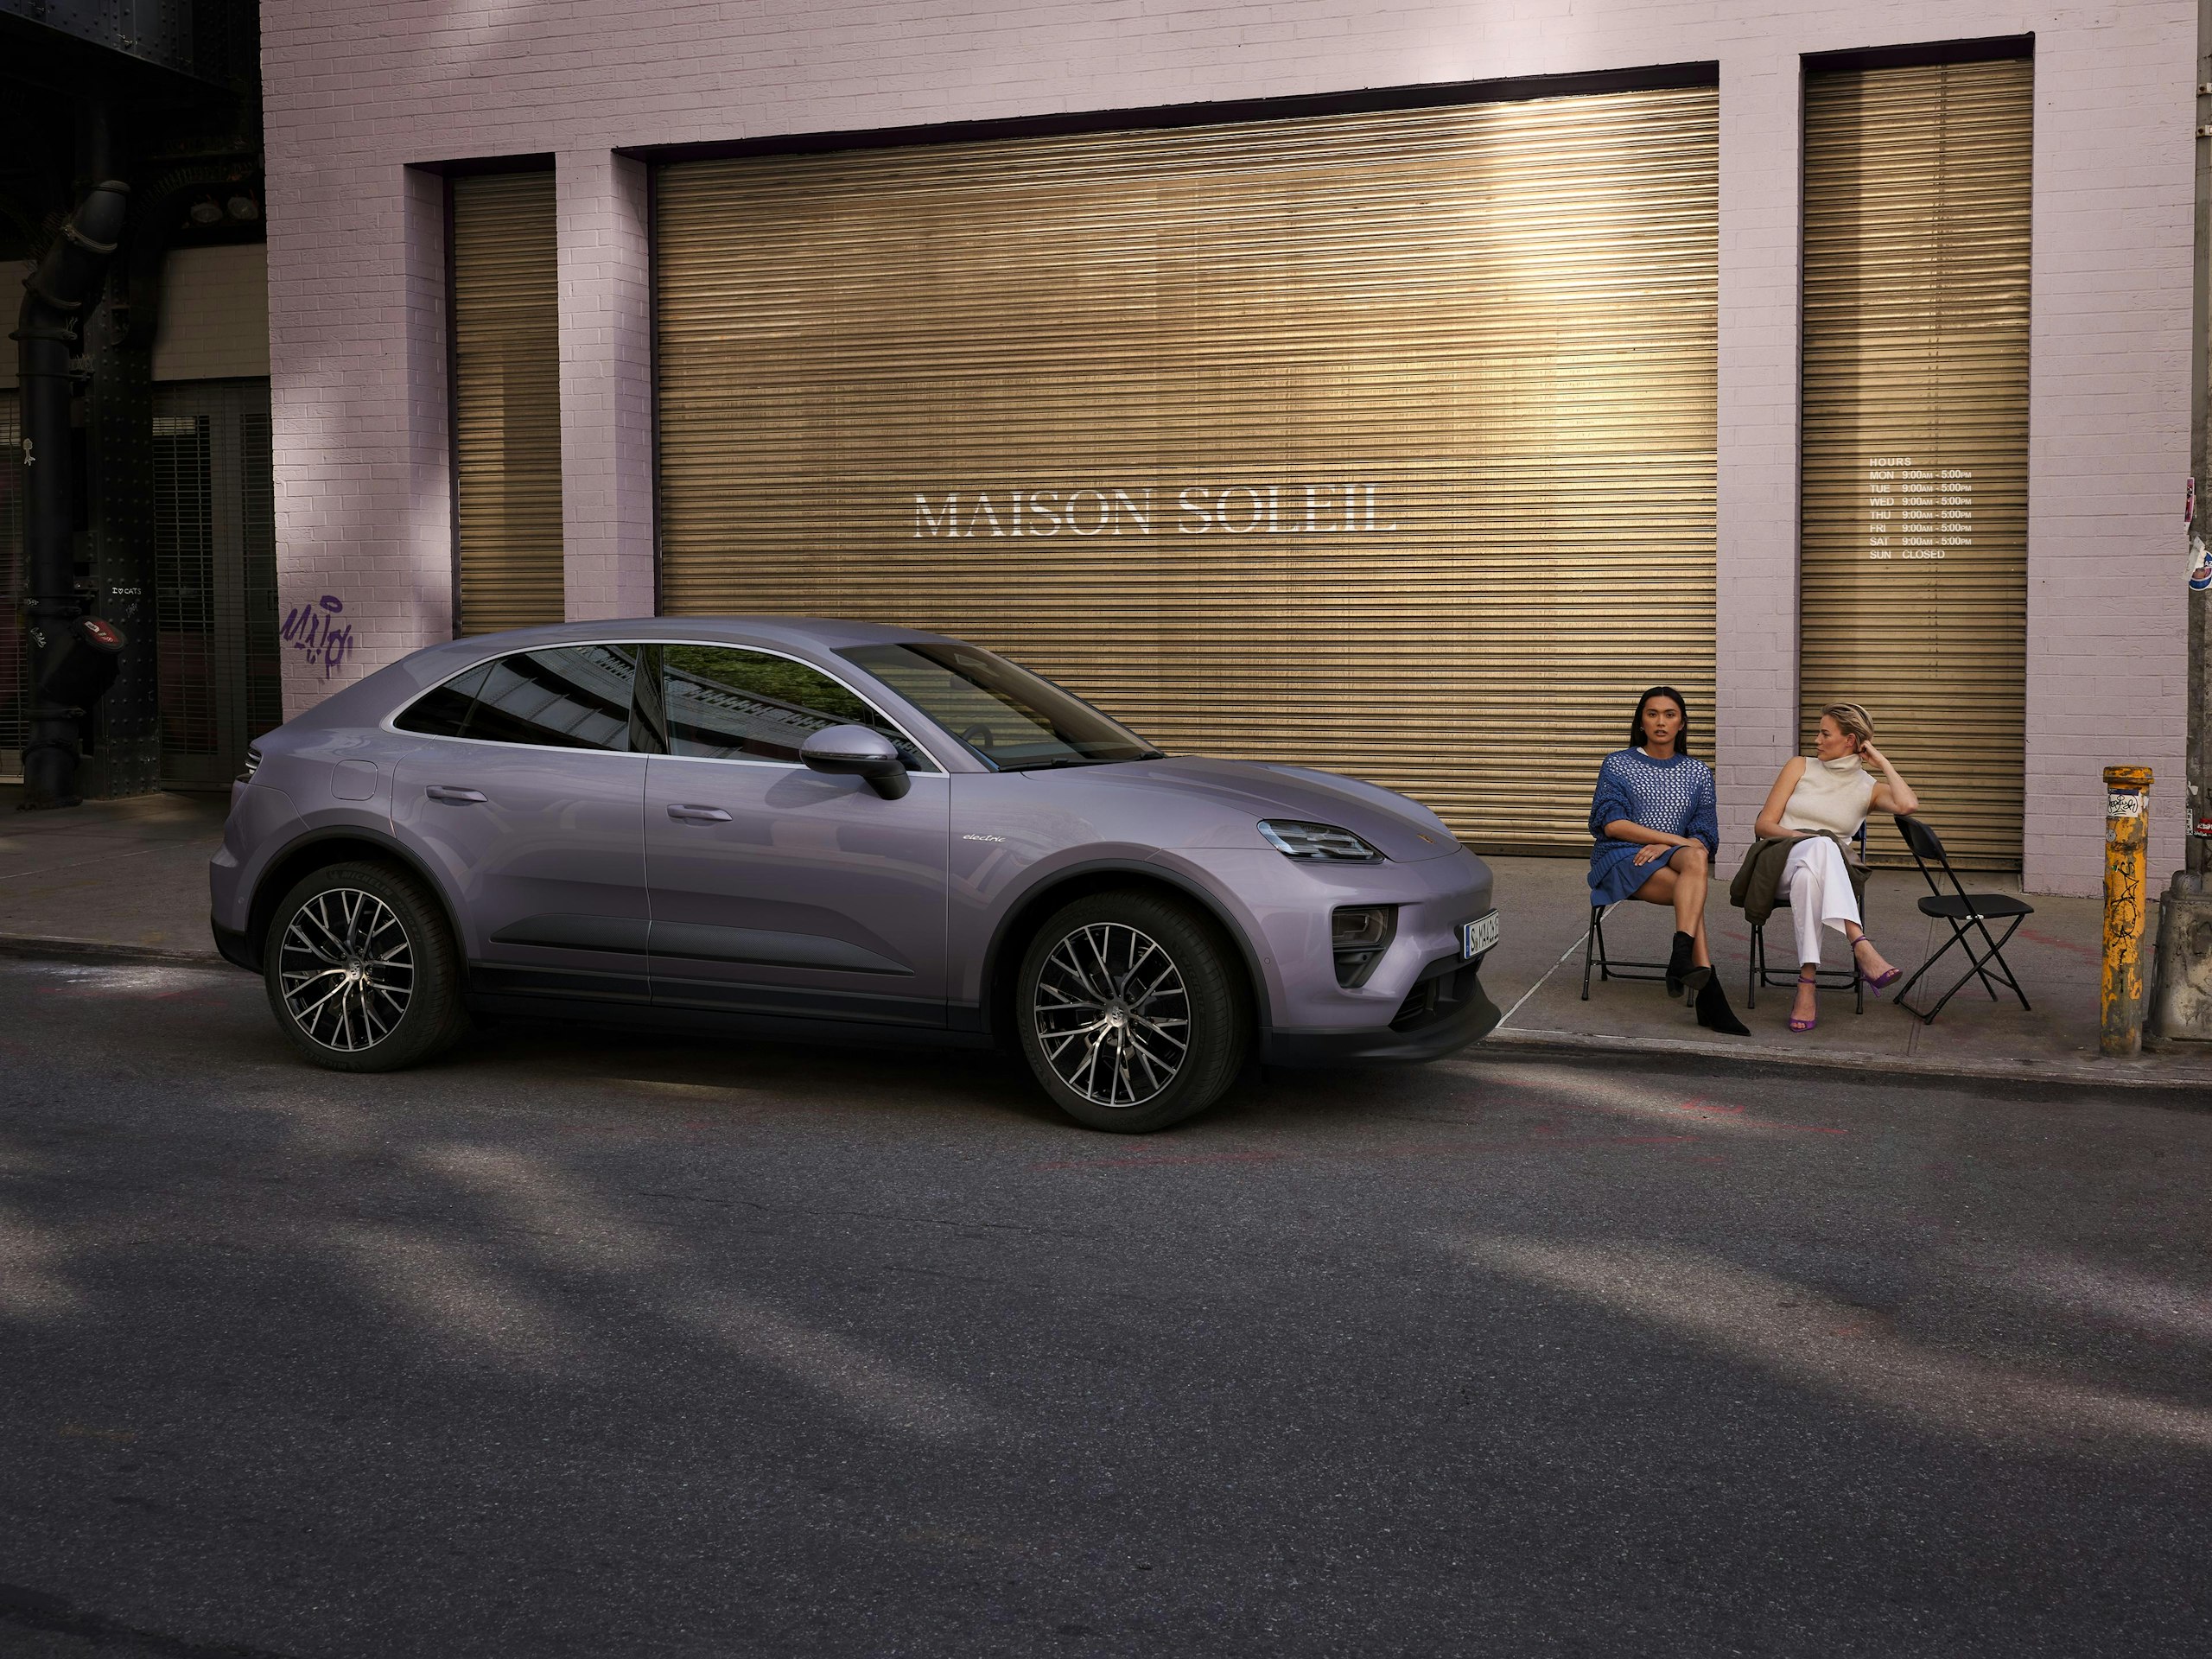 A provence Macan 4 parked on a street in front of a boutique.